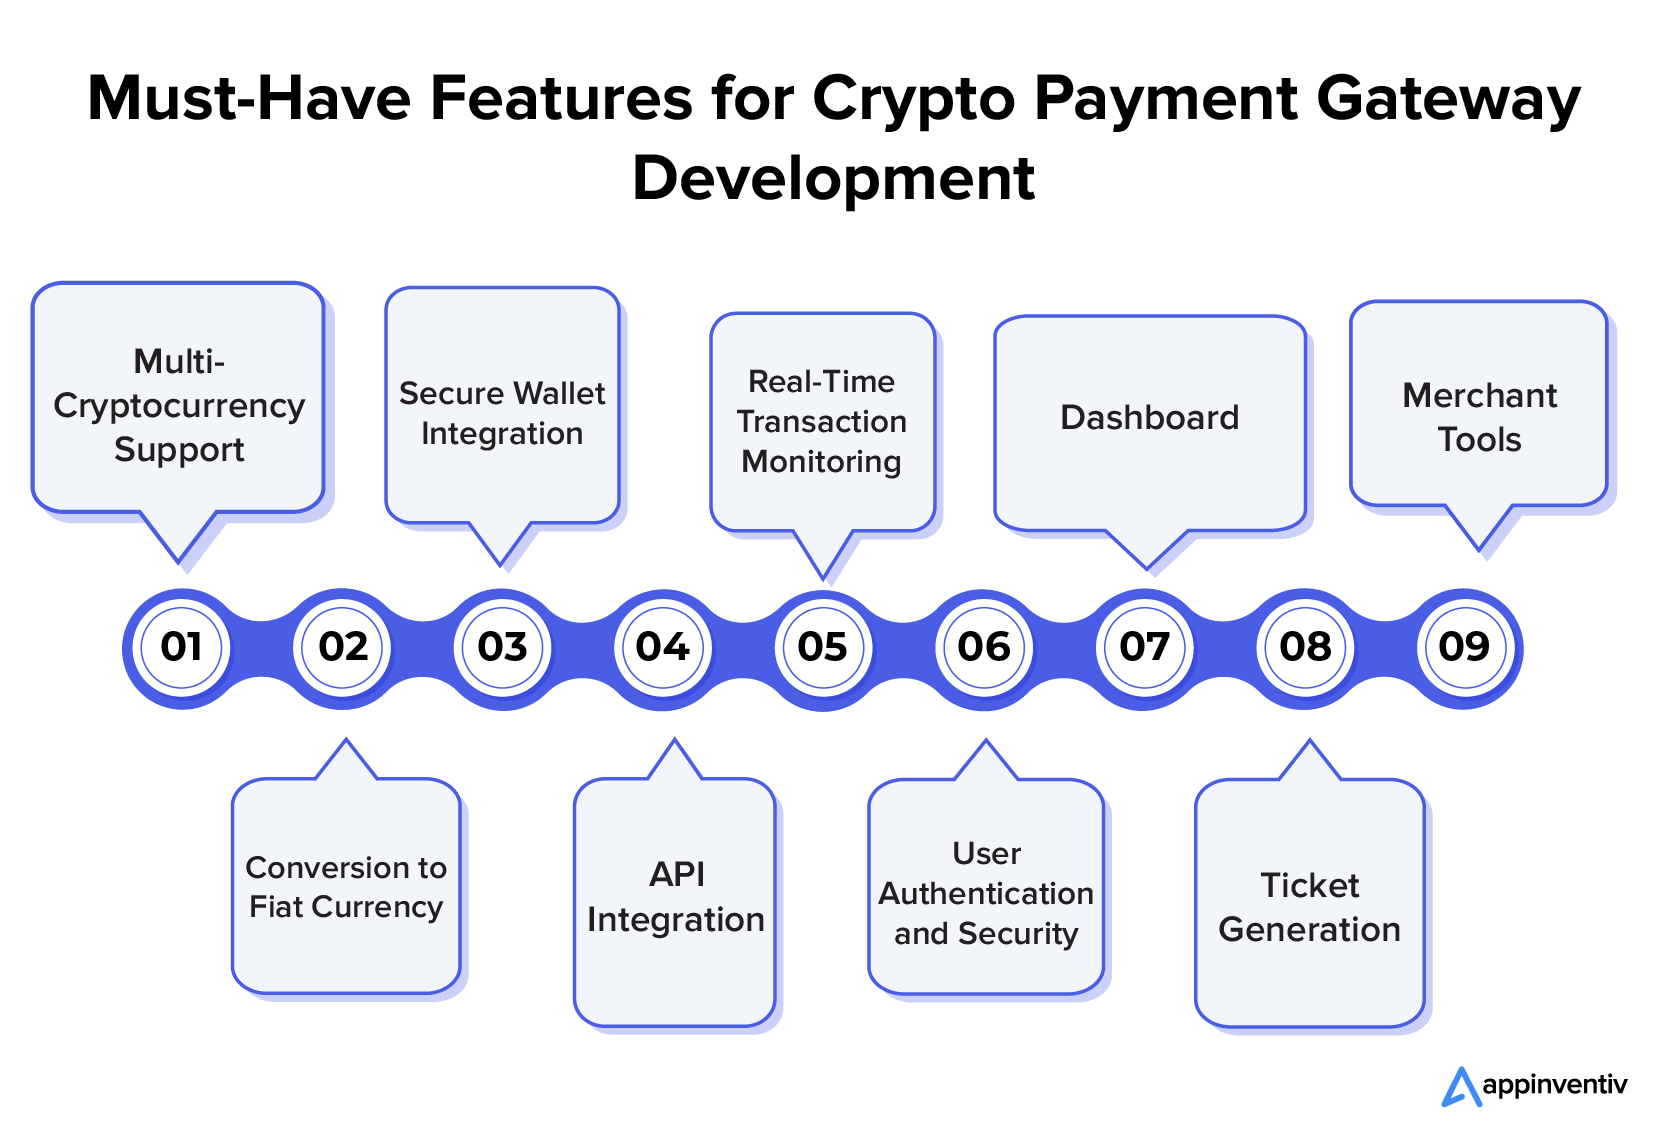 Features for crypto payment gateway